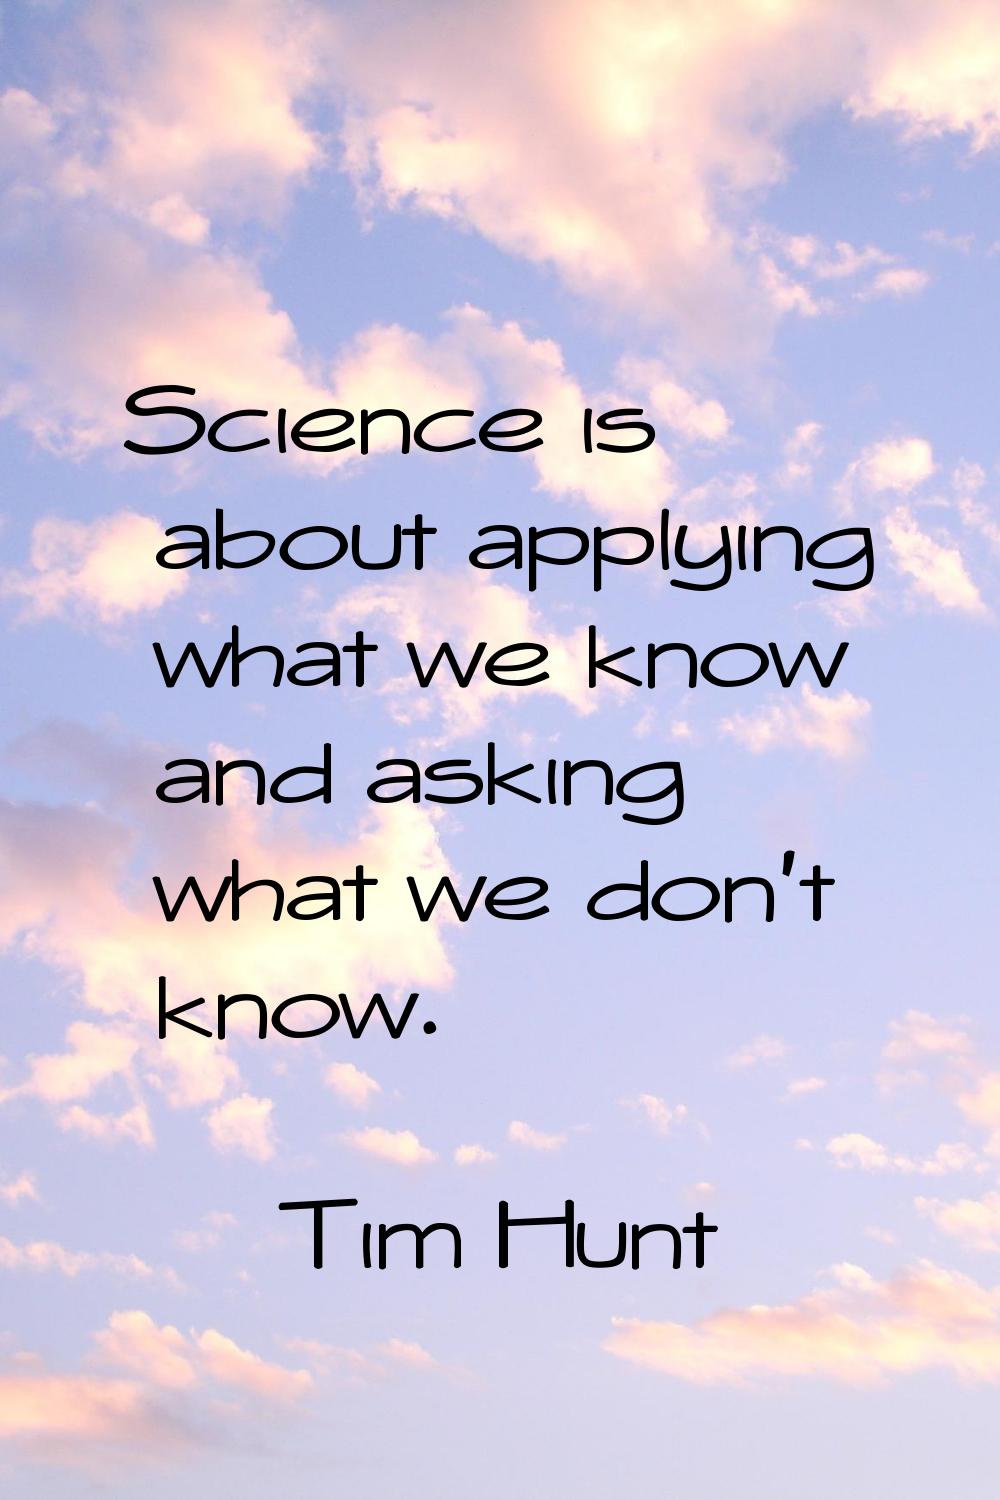 Science is about applying what we know and asking what we don't know.